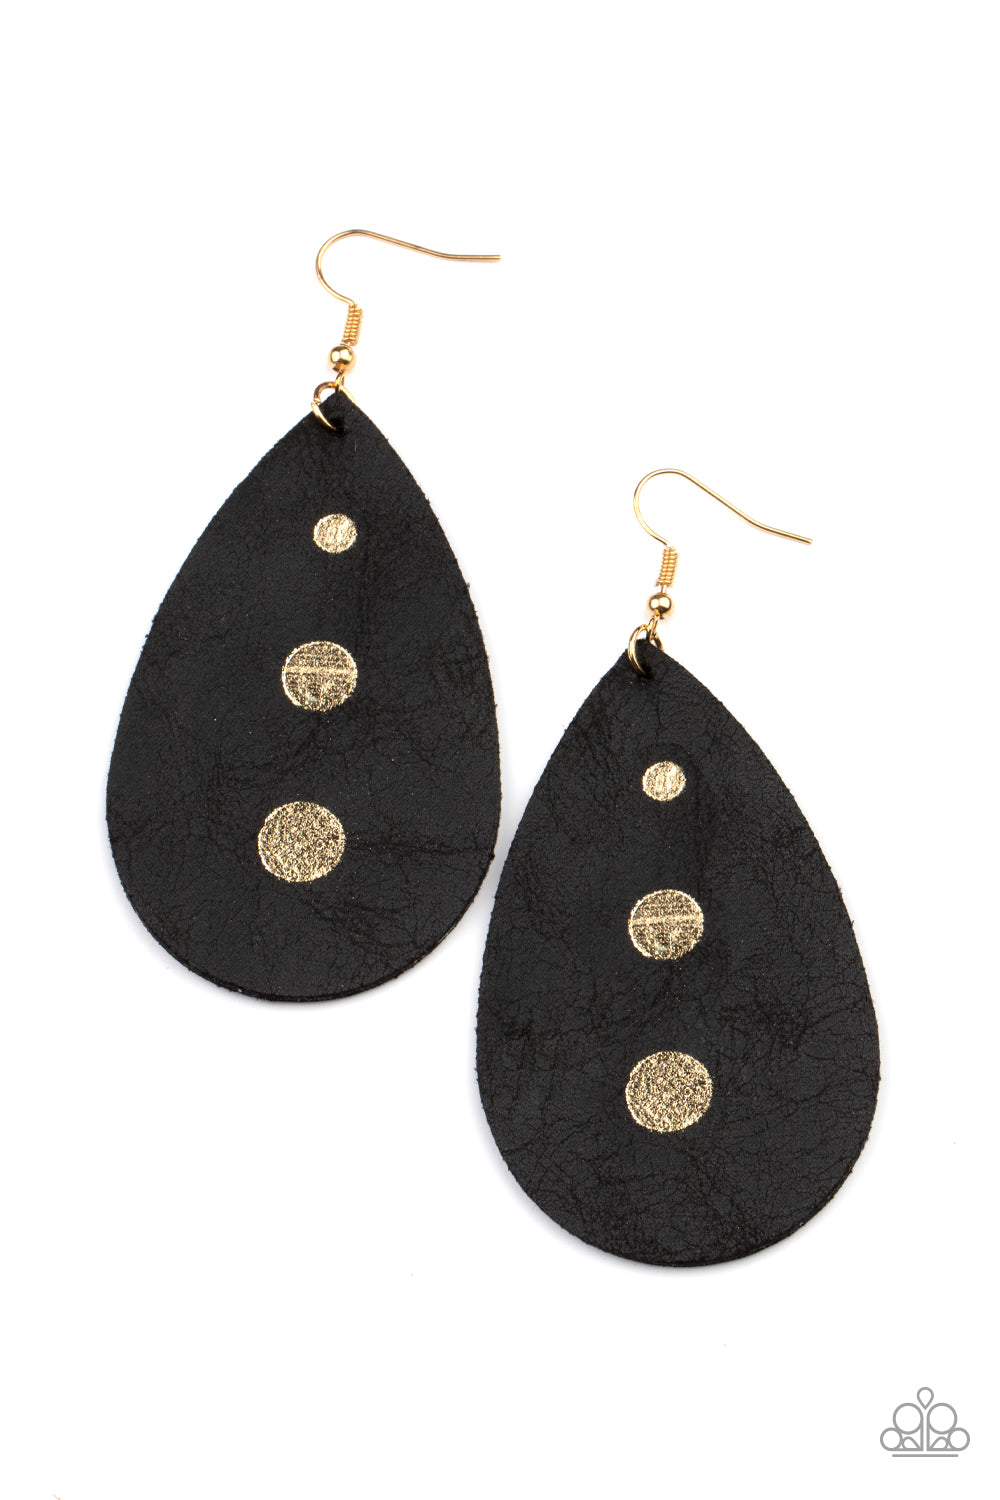 Paparazzi Rustic Torrent - Black Earrings - A Finishing Touch Jewelry